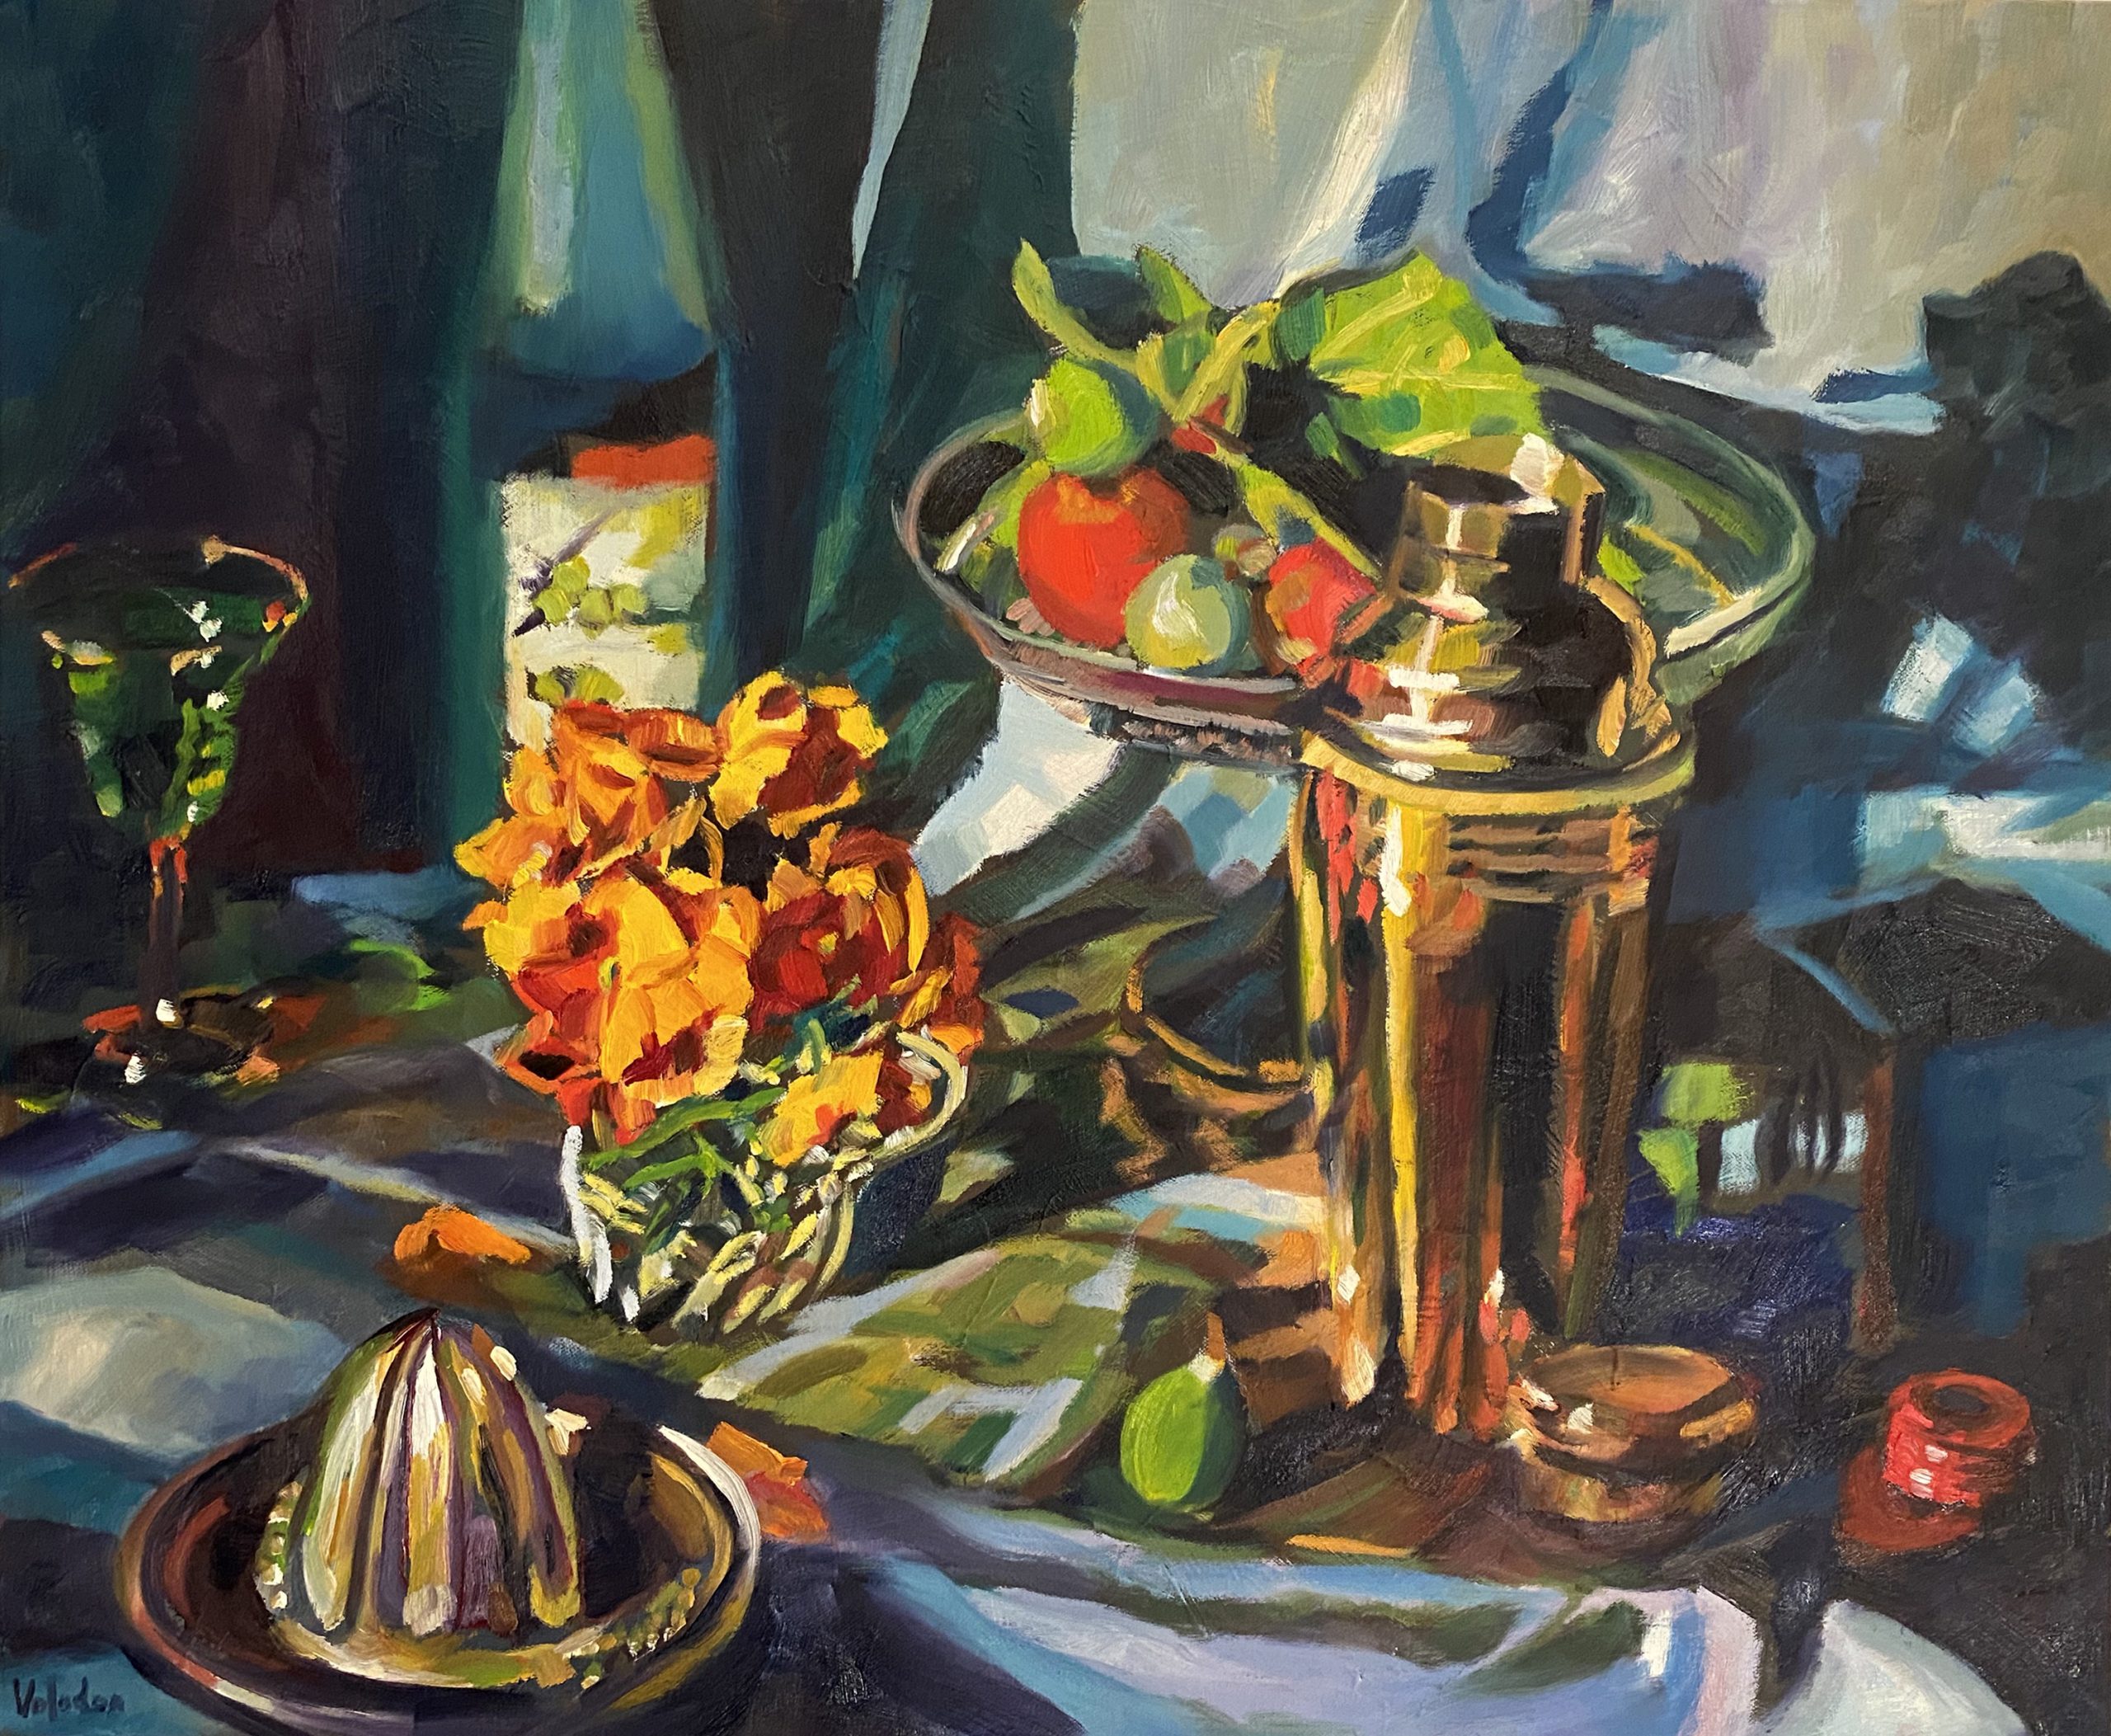 Rosemary Valadon 'Orange Pansies and Sour Apple' oil on canvas 61 x 71cm $9,600